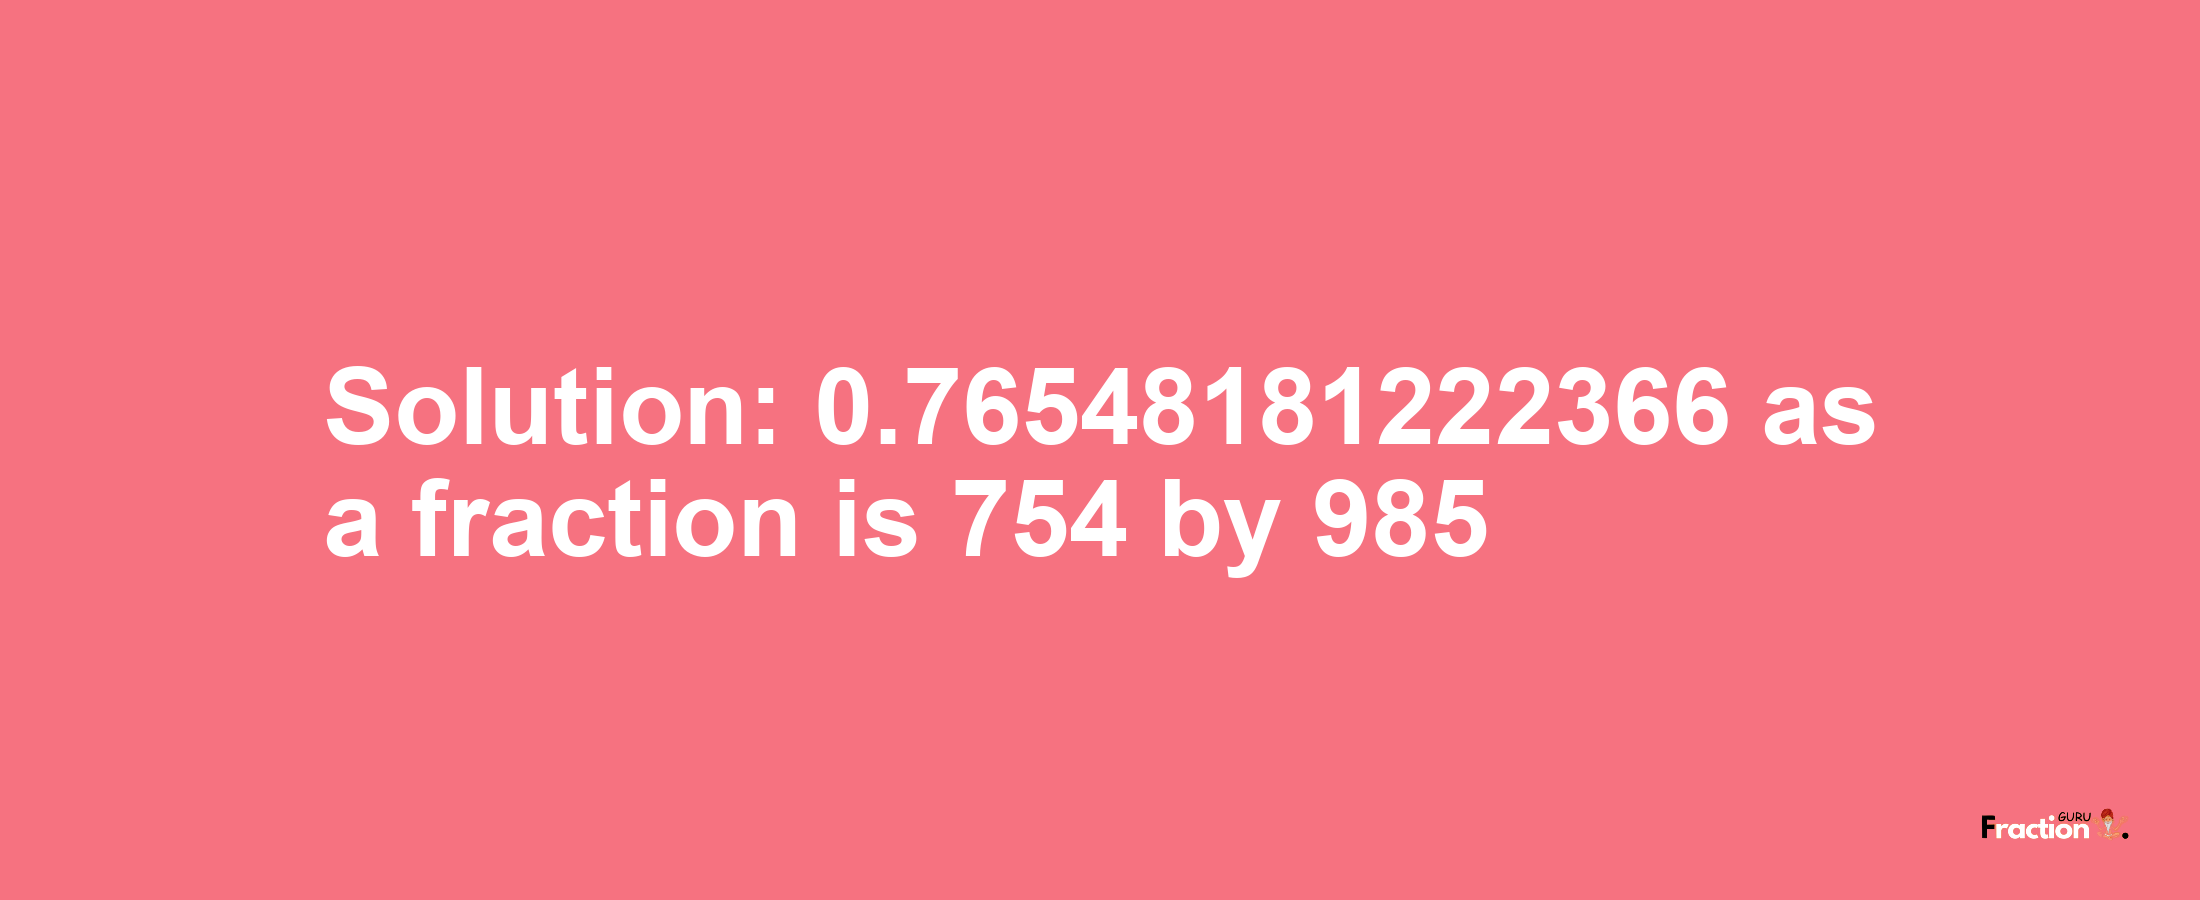 Solution:0.76548181222366 as a fraction is 754/985